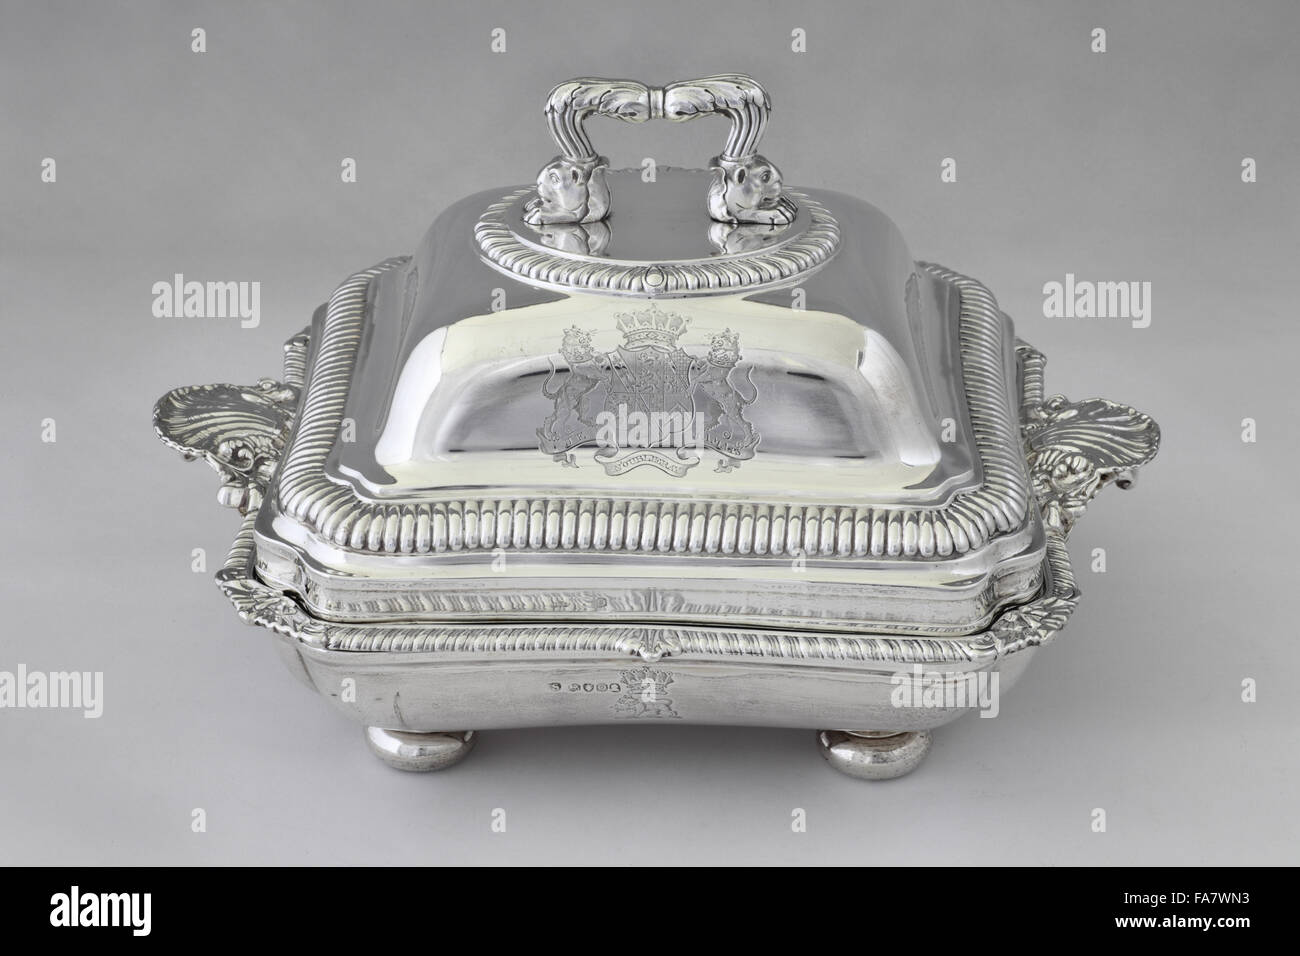 Entree dish by Paul Store, 1809, part of the silver collection at Ickworth, Suffolk. National Trust inventory number: 852103 Stock Photo